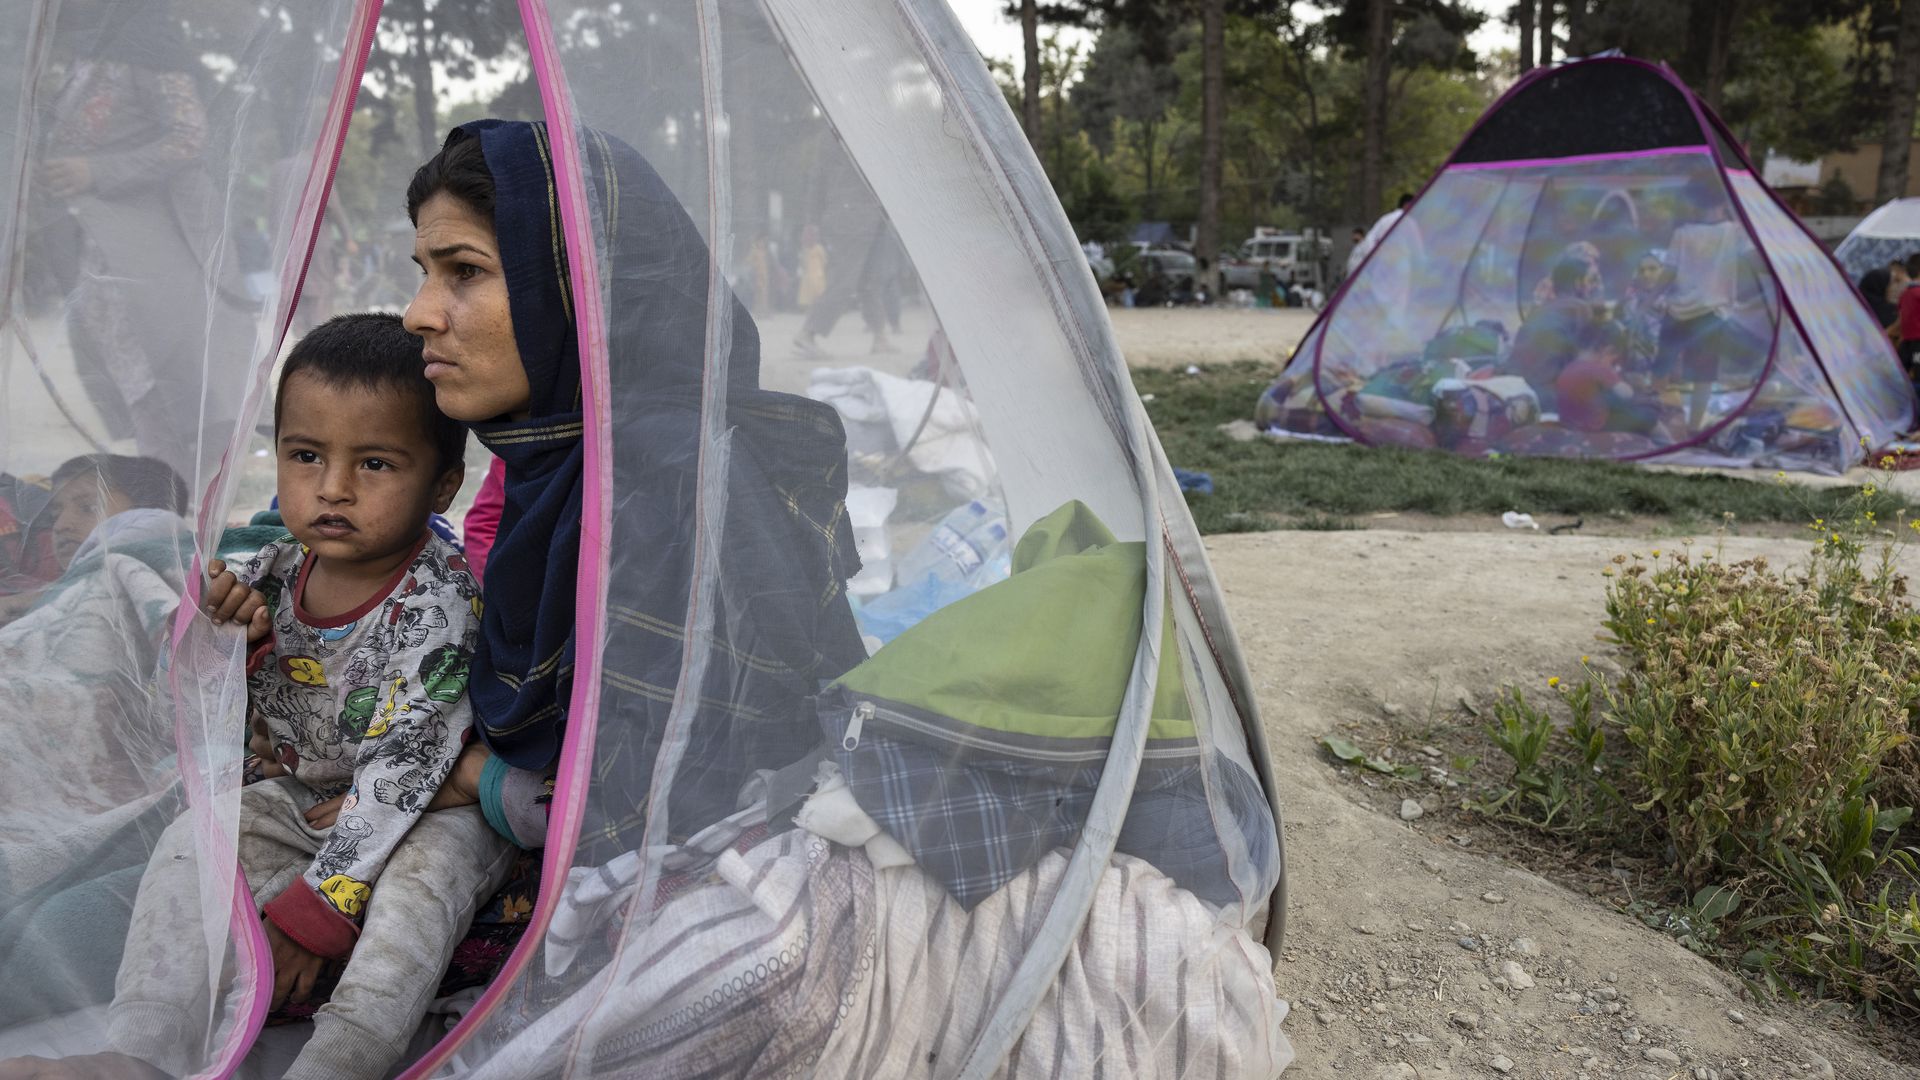 Photo of a woman holding a child in a translucent tent outdoors, looking pensive